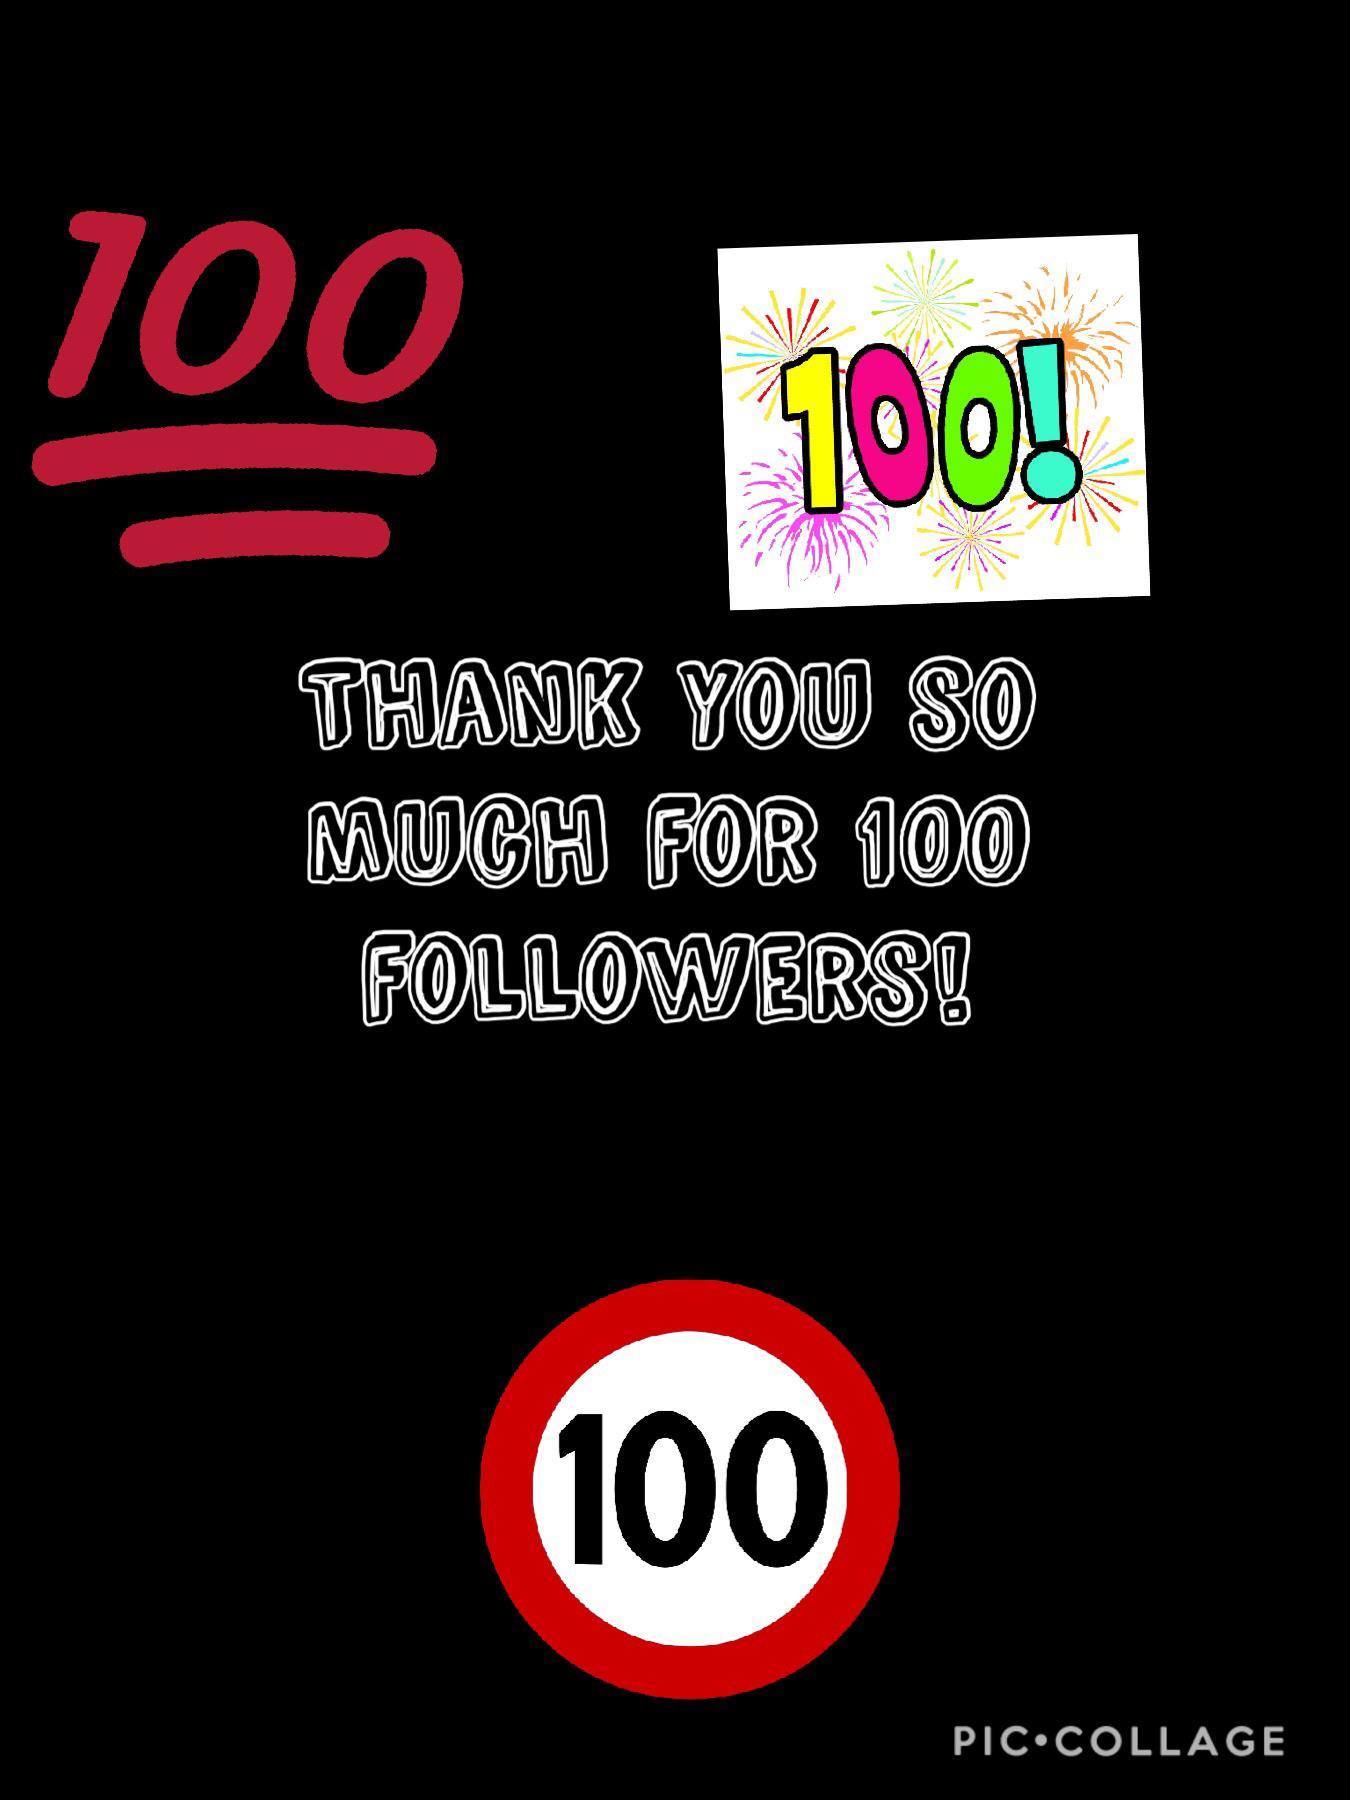 Thank you for 100